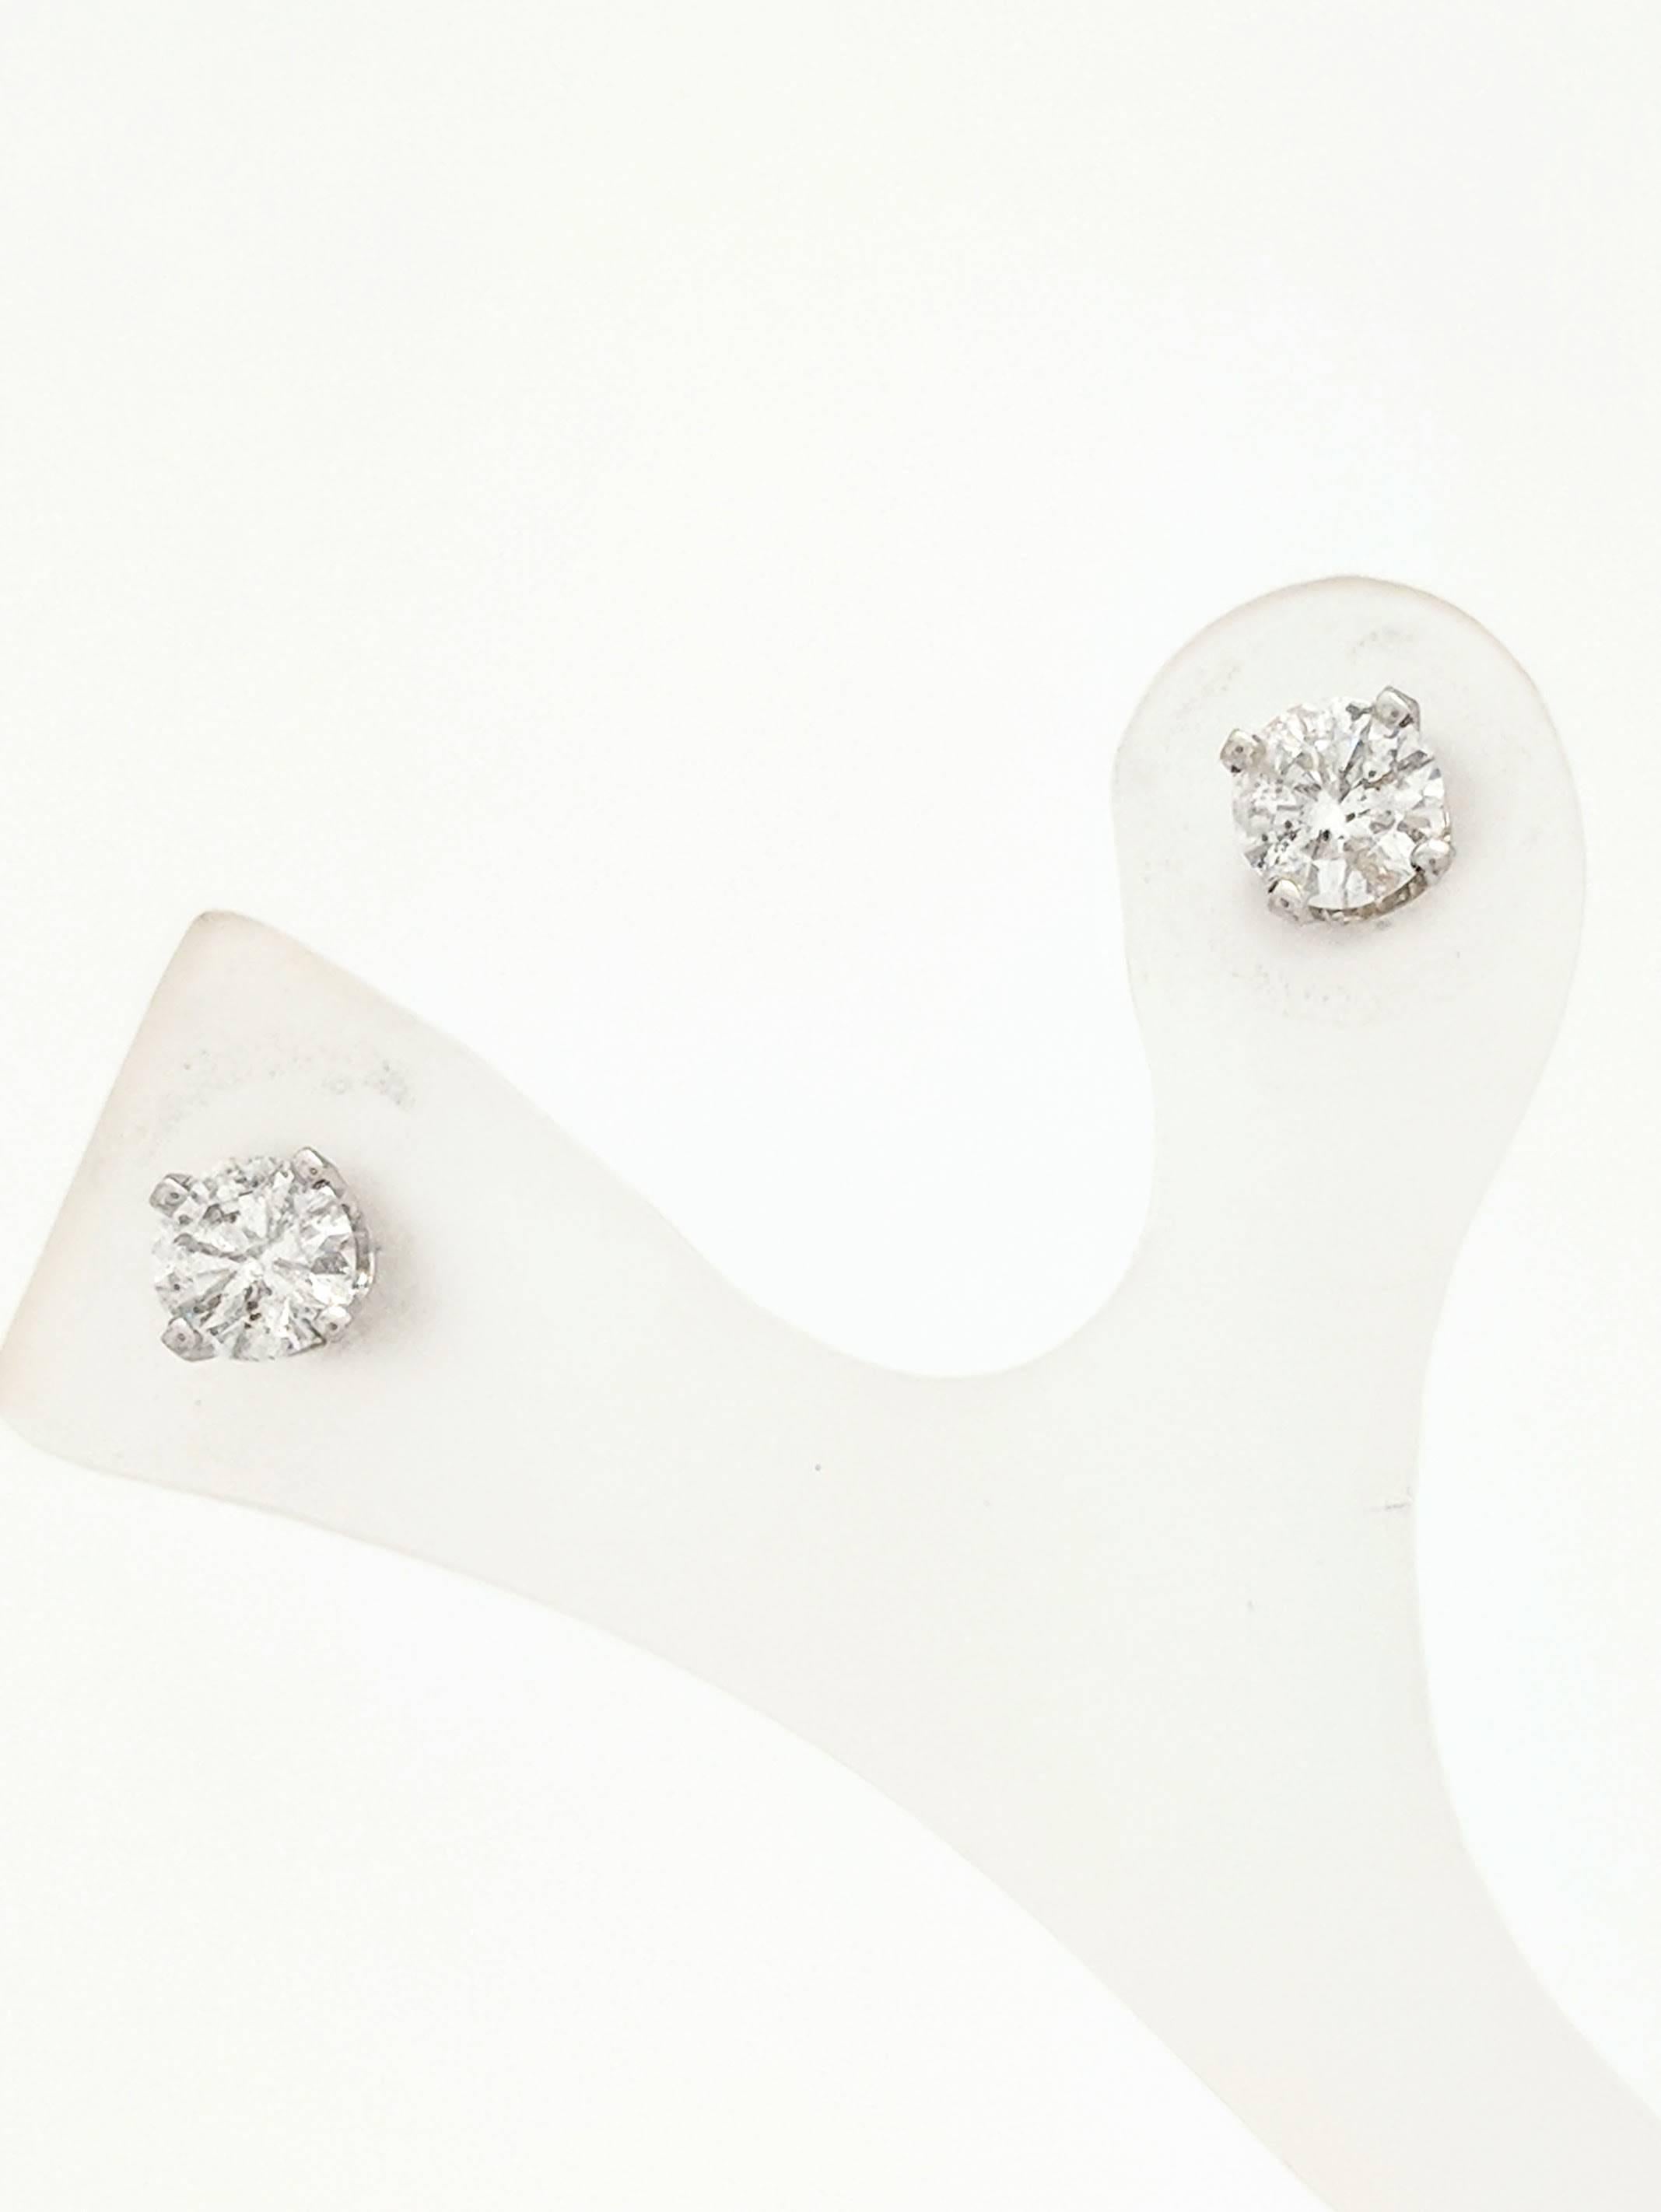 14K White Gold .50ctw Round Brilliant Cut Diamond Stud Earrings I1/H-I

You are viewing a beautiful pair of round brilliant cut diamond stud earrings. These earrings are crafted from 14k white gold and weighs .9 grams. Each earring features (1)